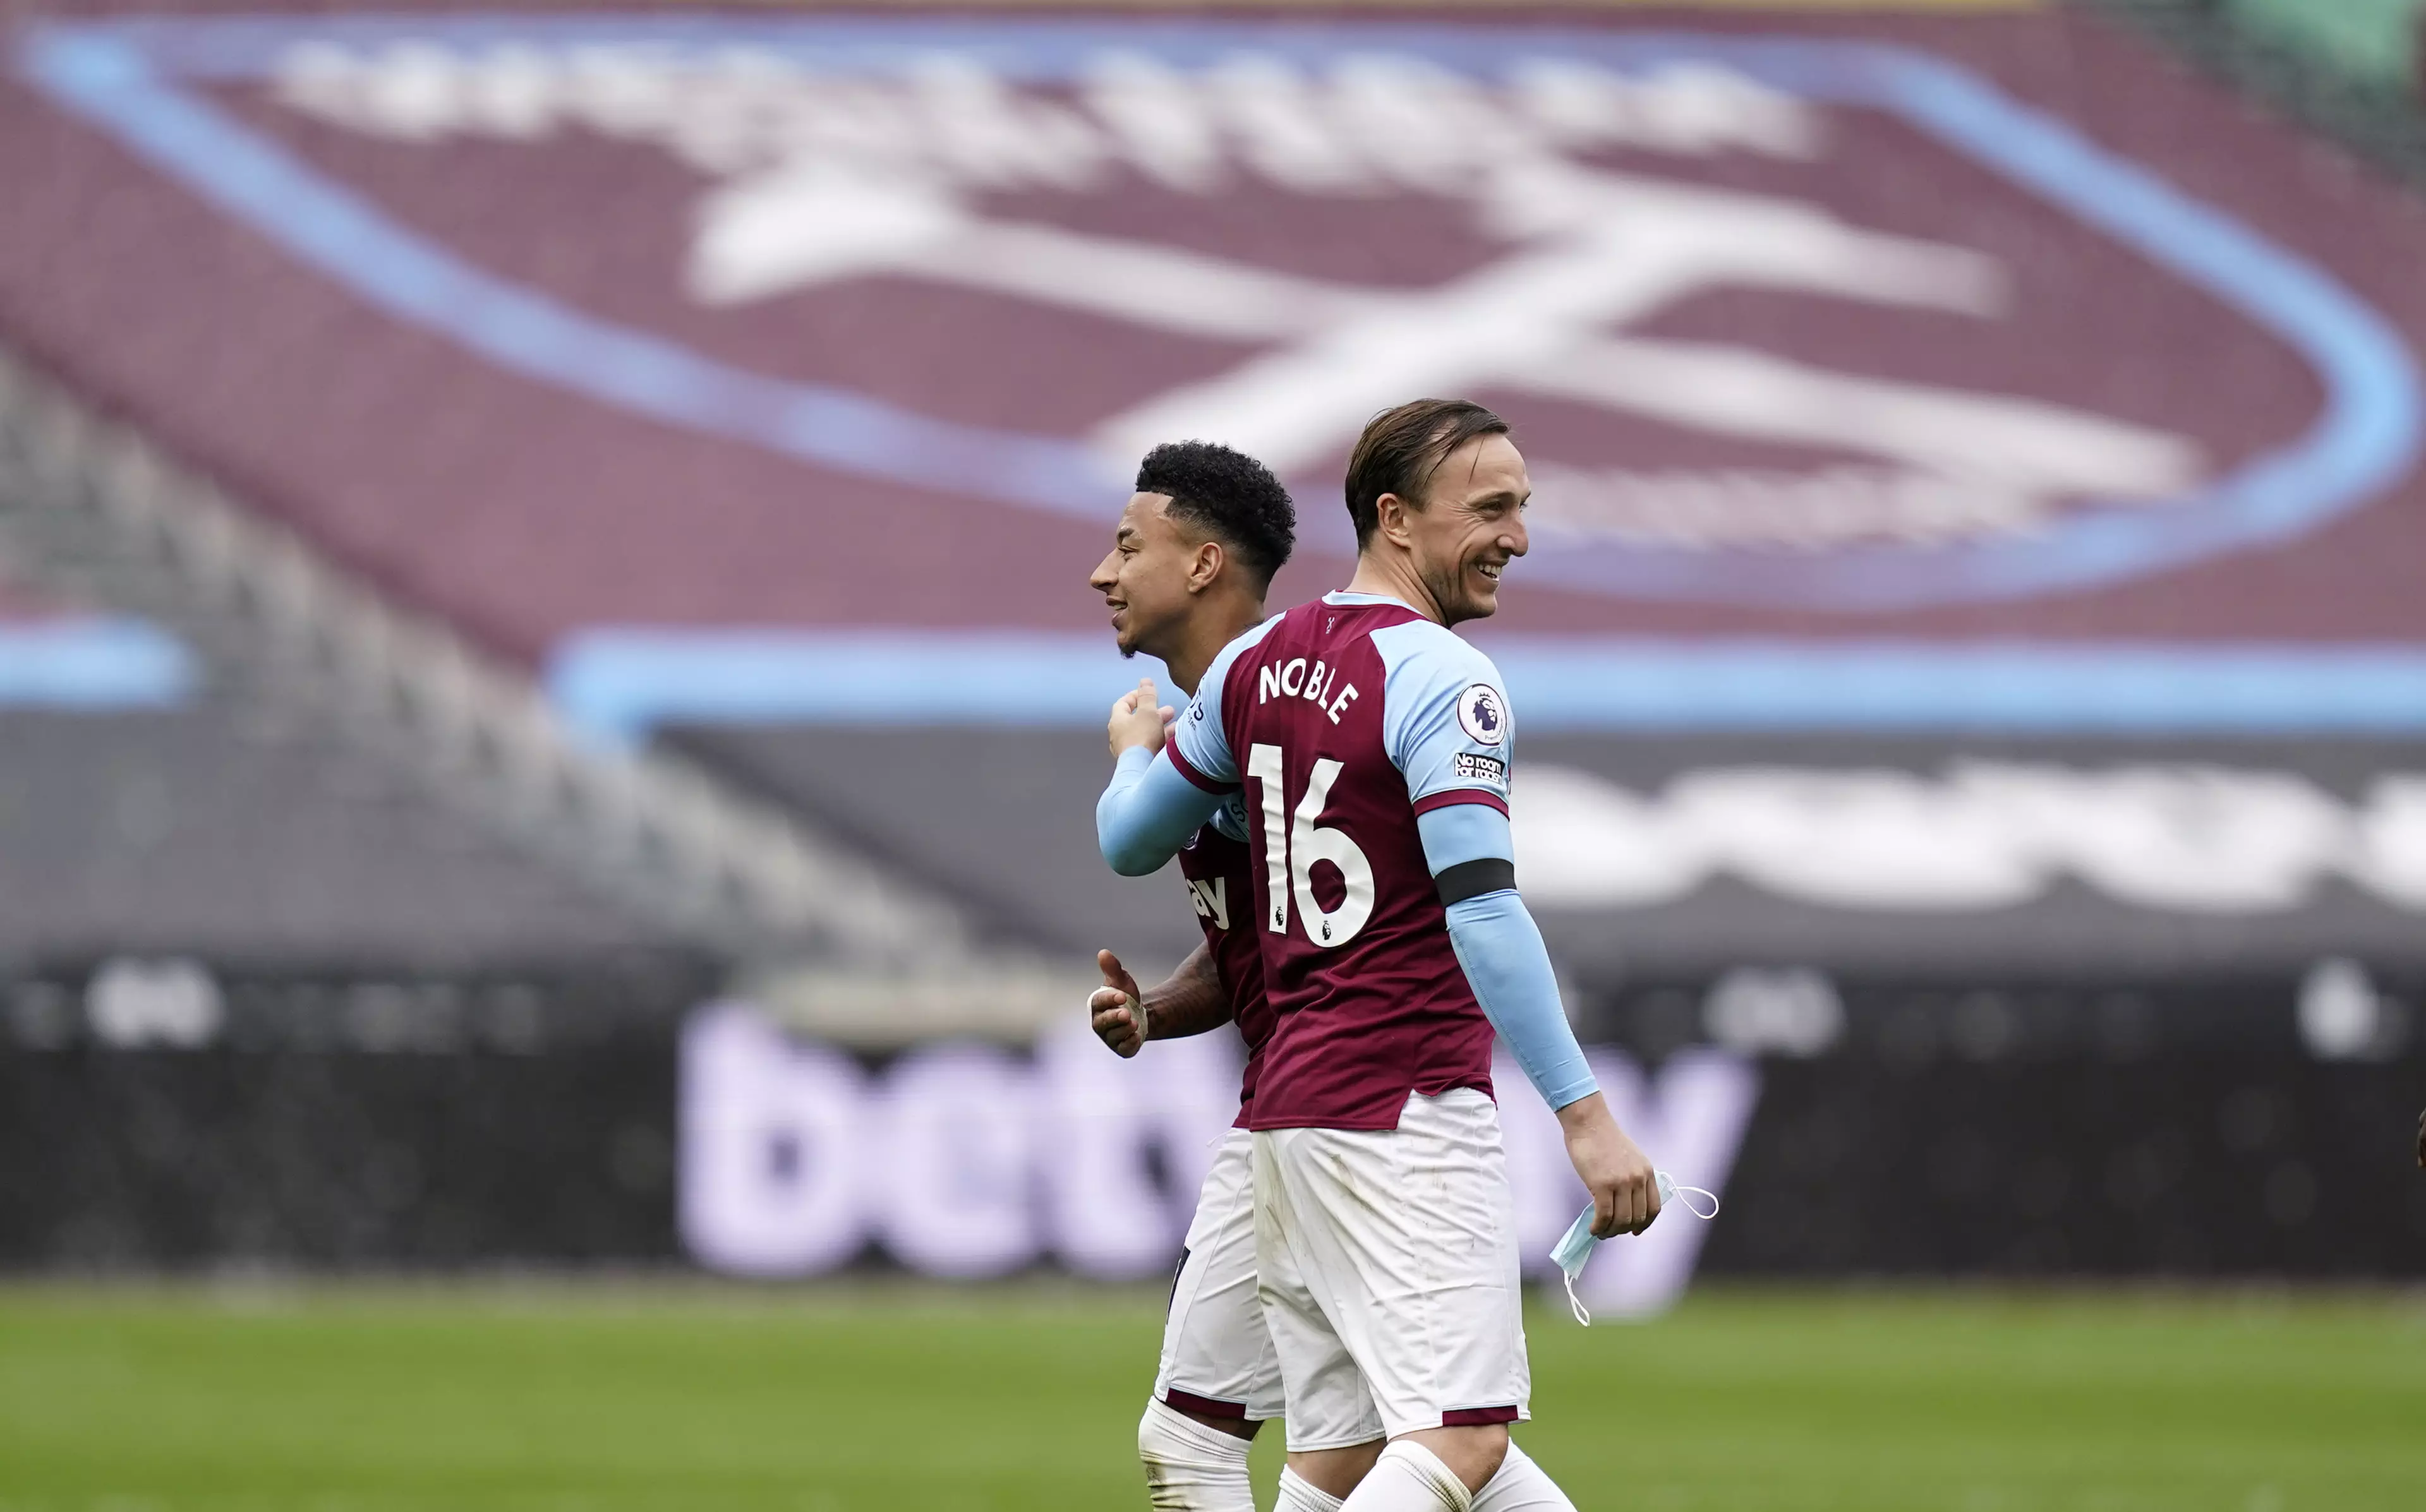 Noble begrudgingly celebrates with his teammate. Image: PA Images